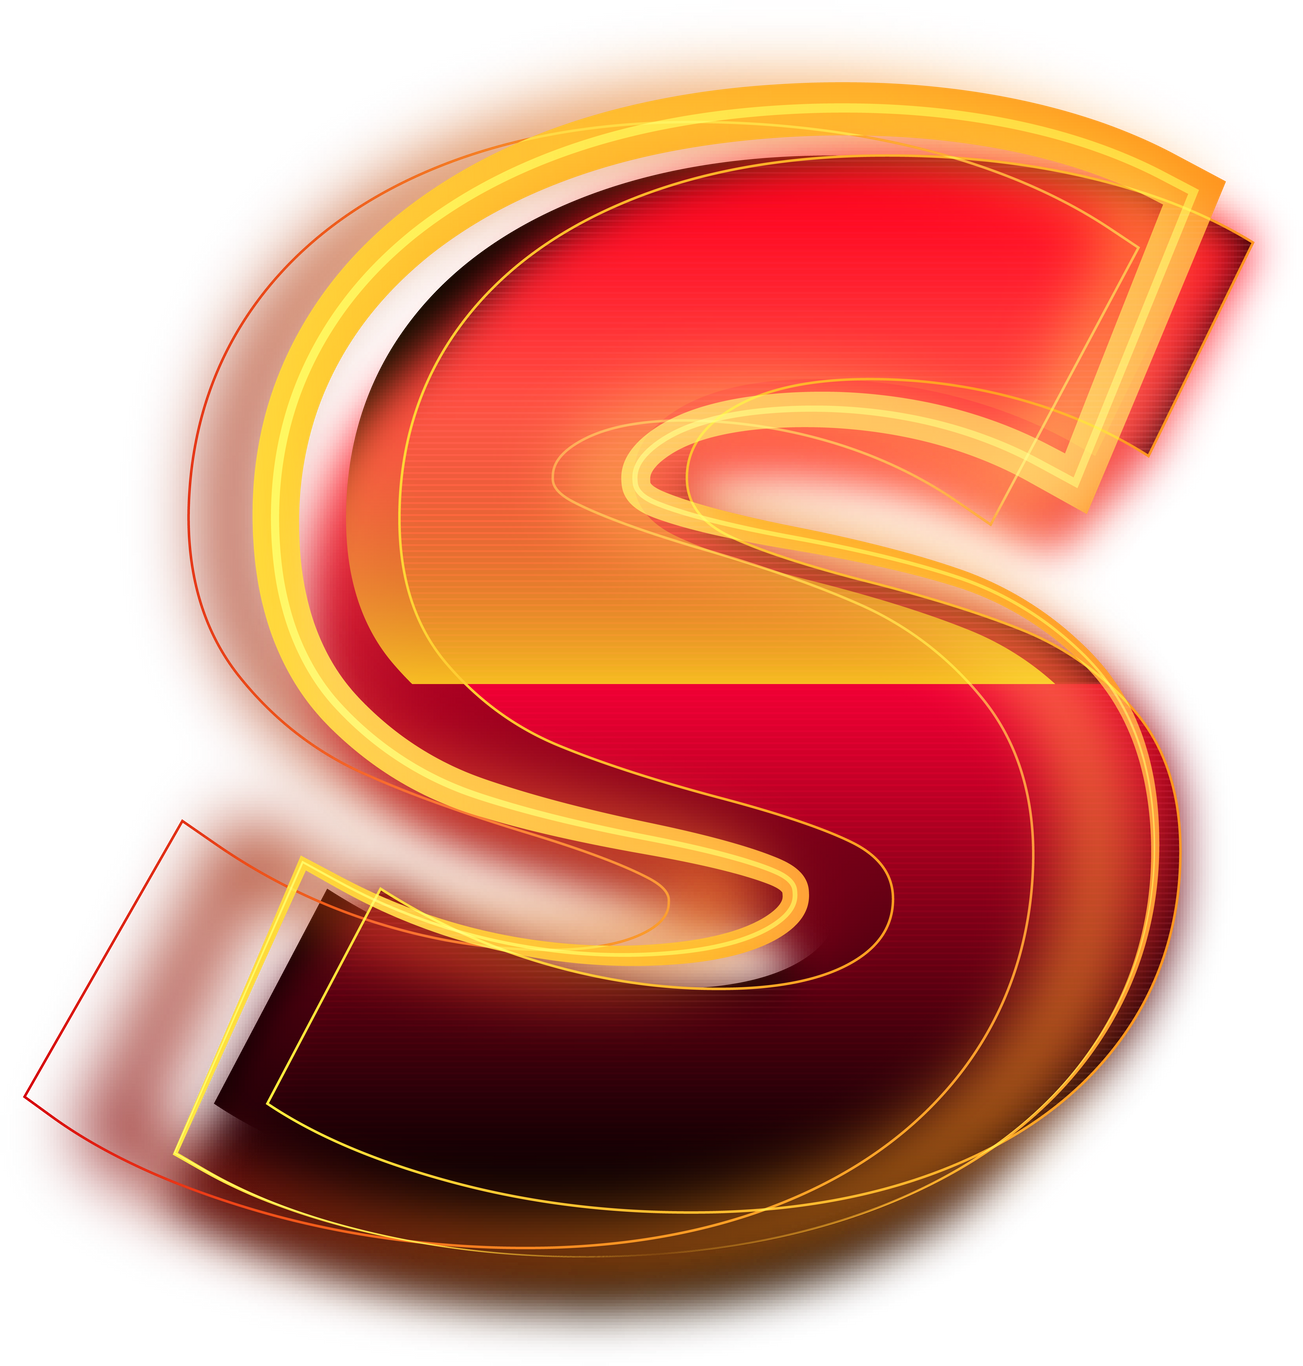 Red Hot Fire Alphabet Letter S